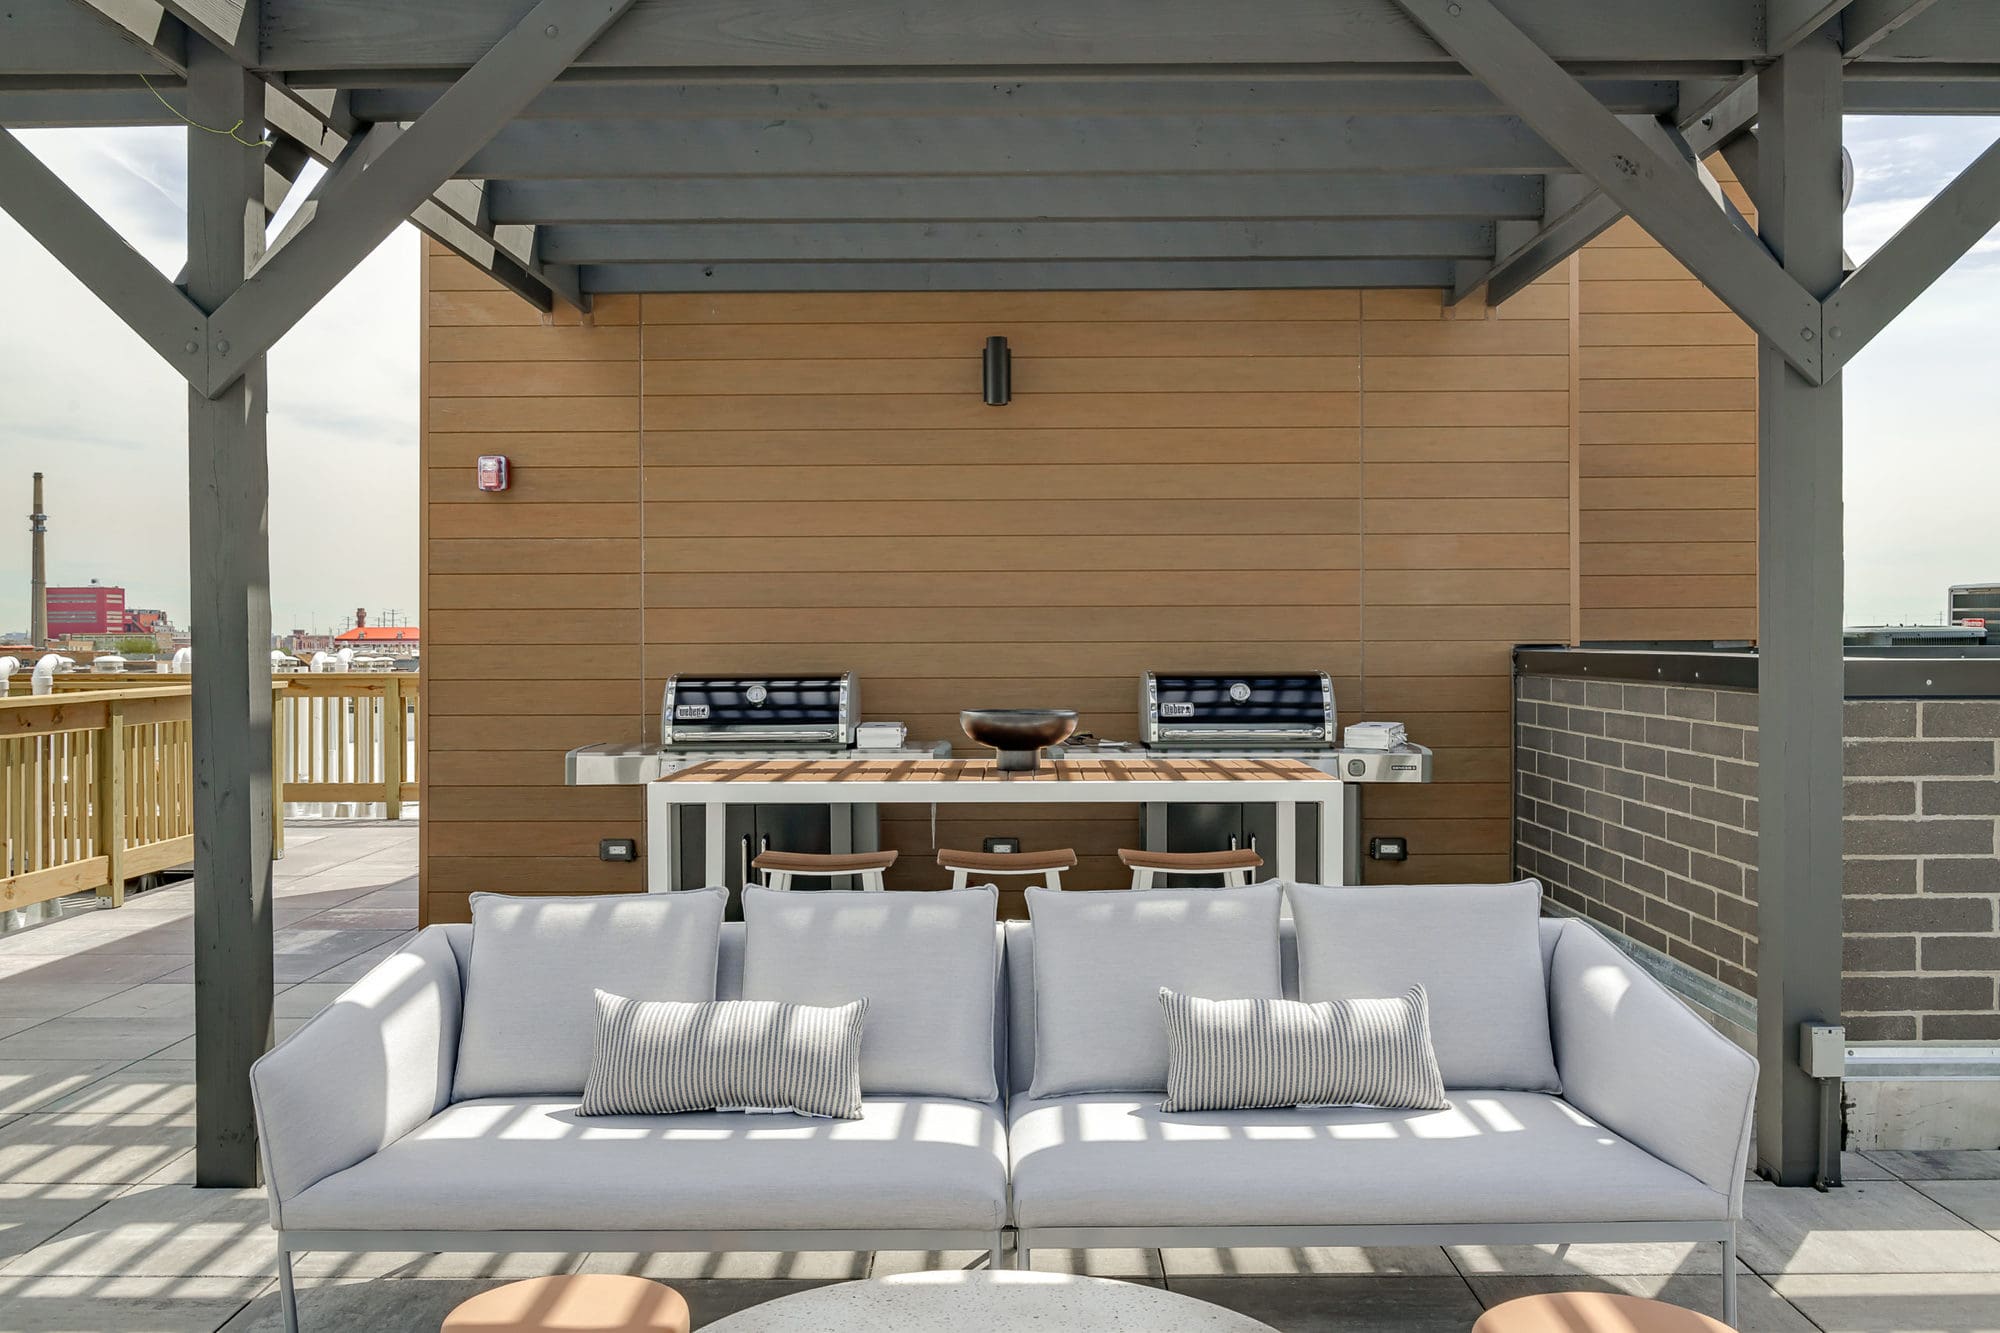 Rooftop Grill + Lounge Area